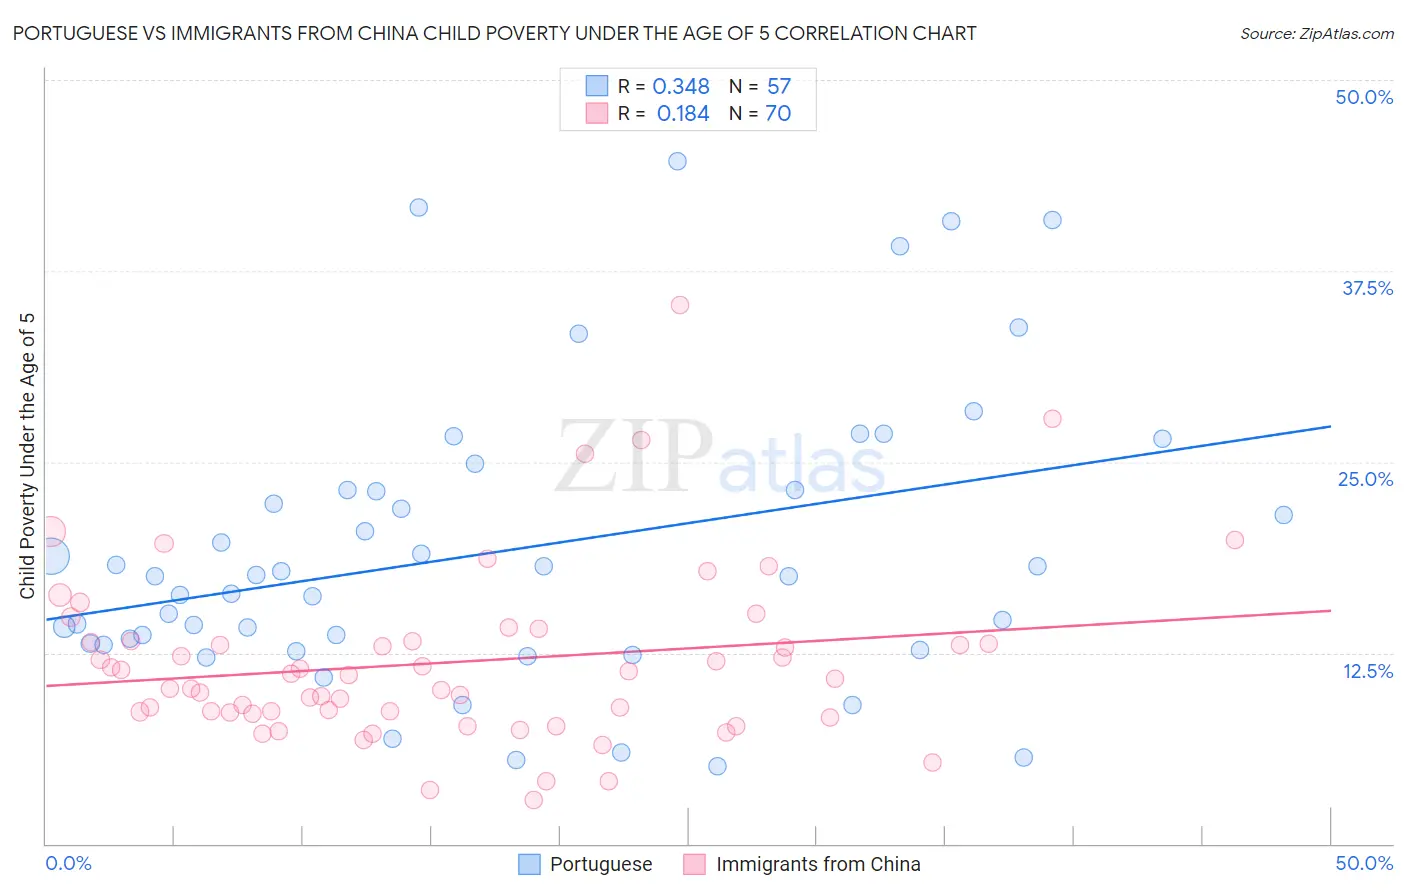 Portuguese vs Immigrants from China Child Poverty Under the Age of 5